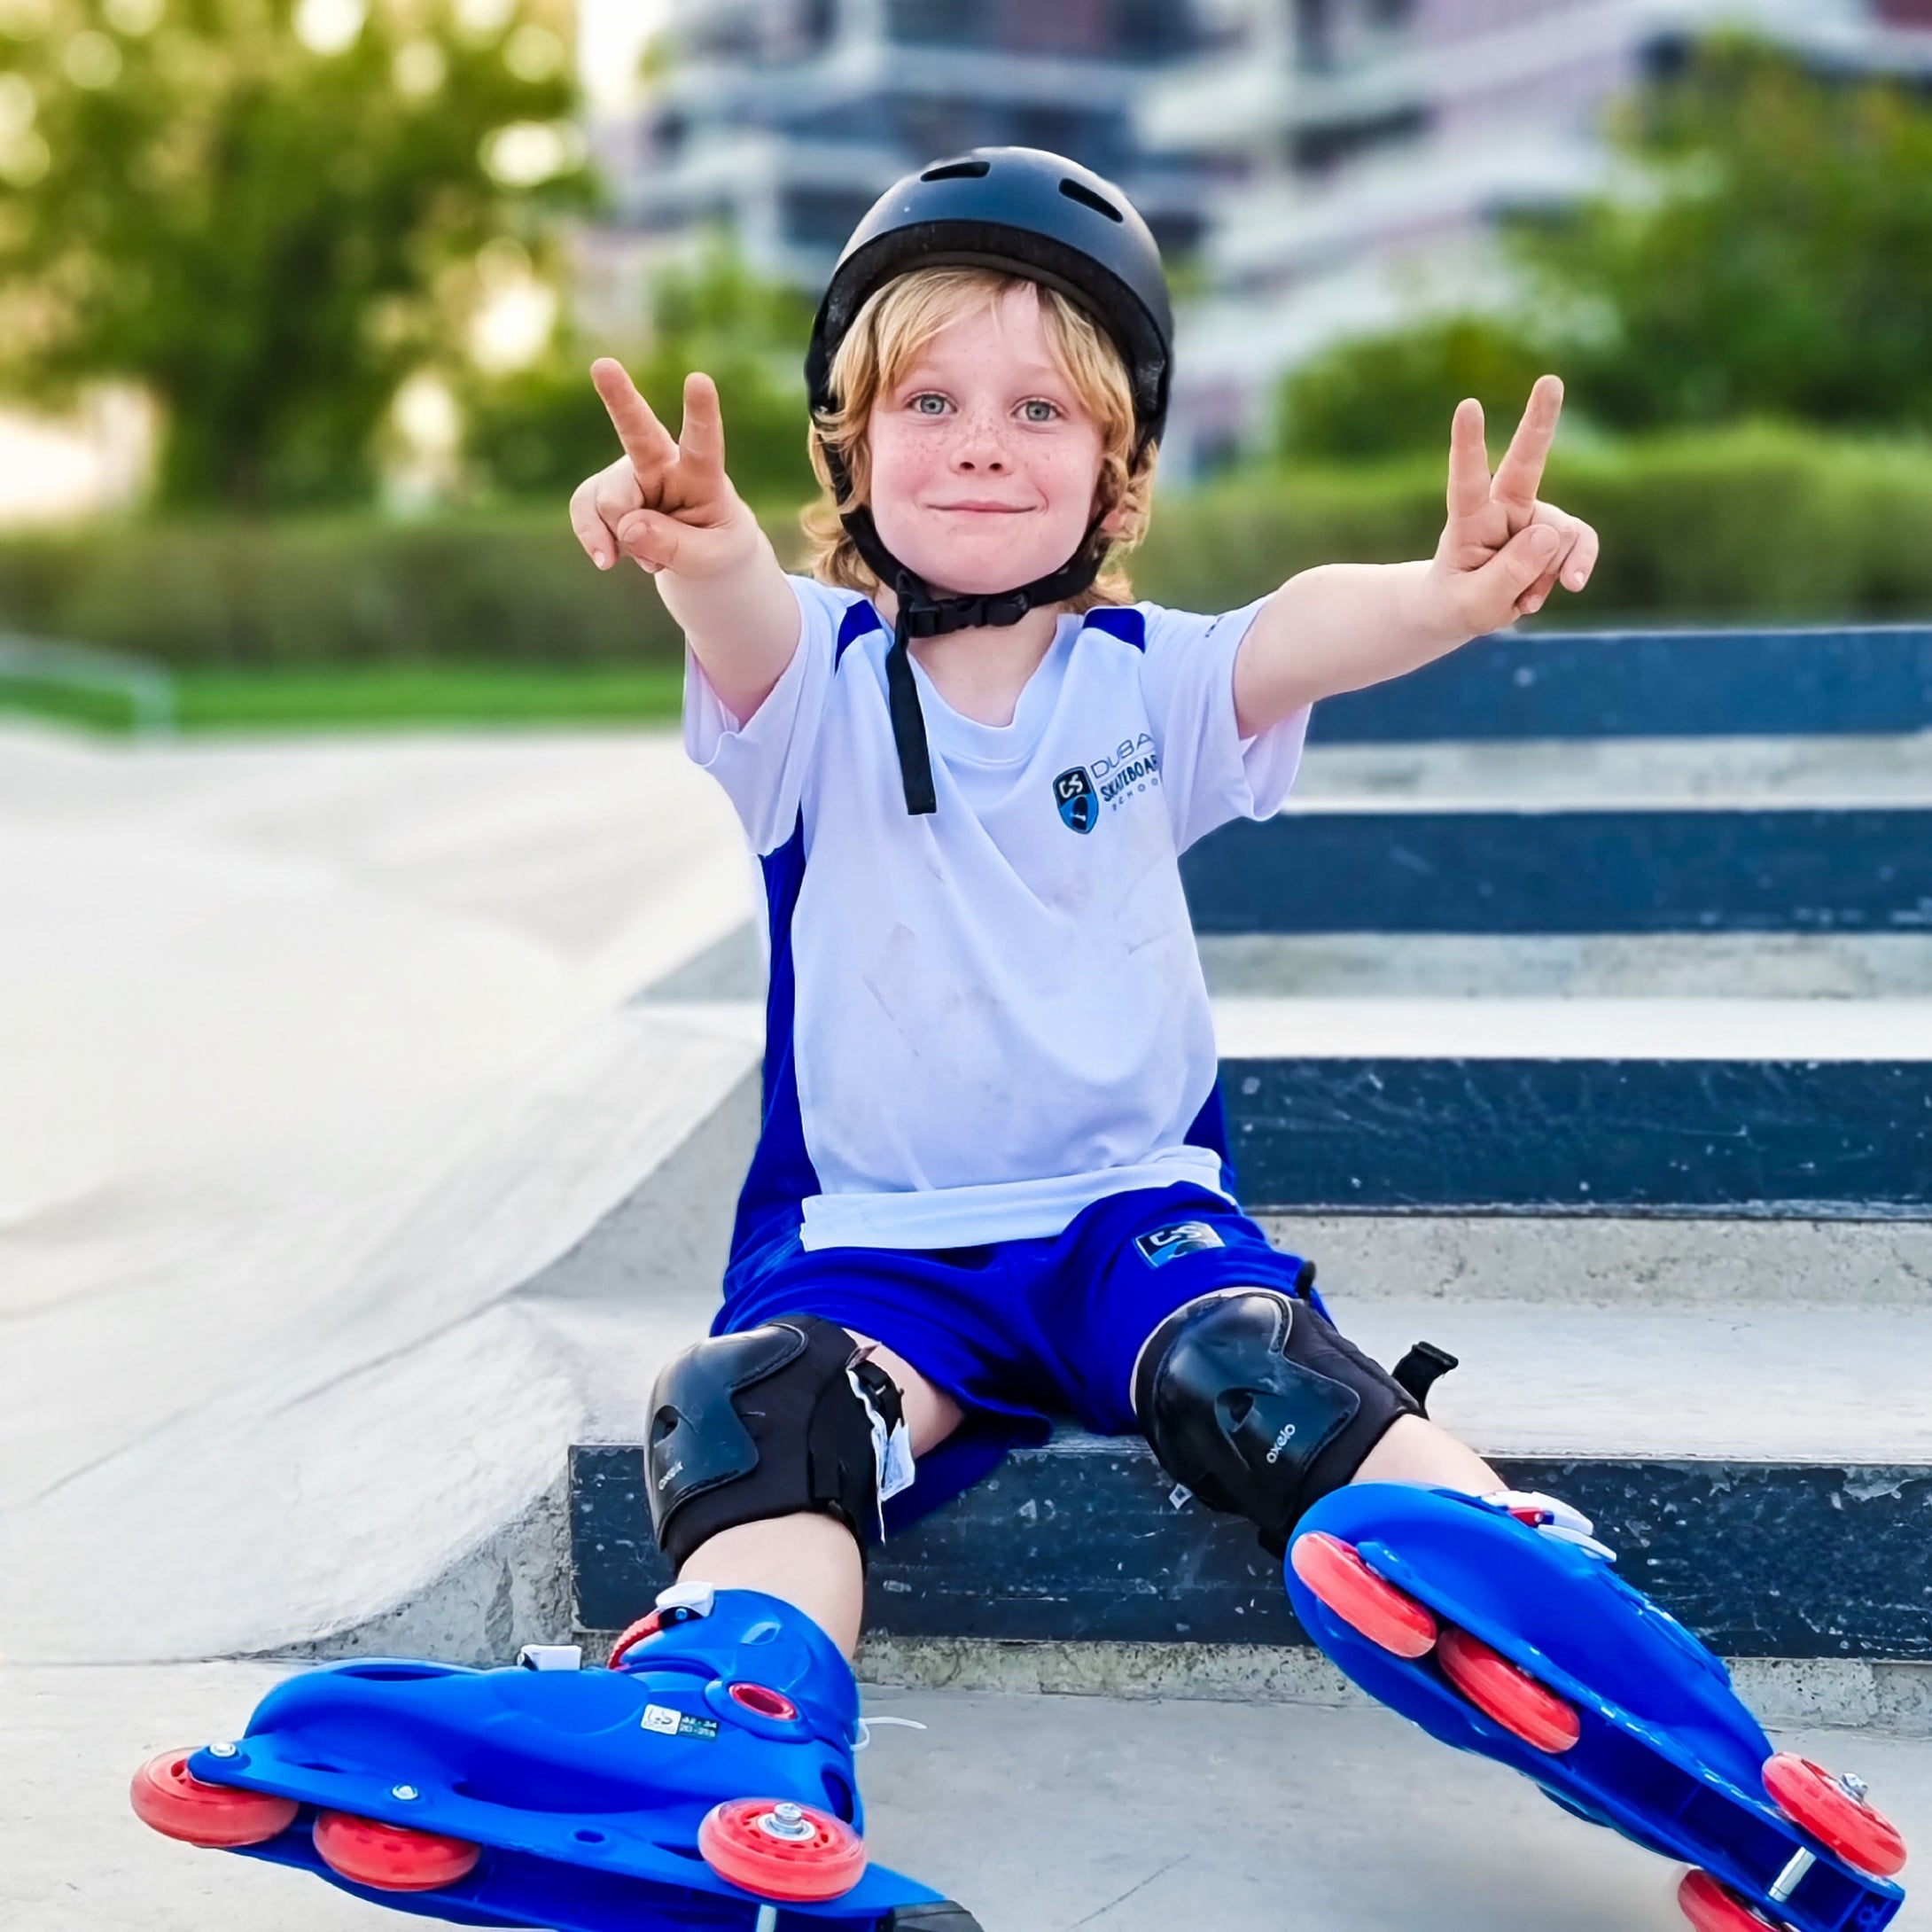 JUNIOR ROLLER SKATING LESSONS - BOOK GROUP CLASSES